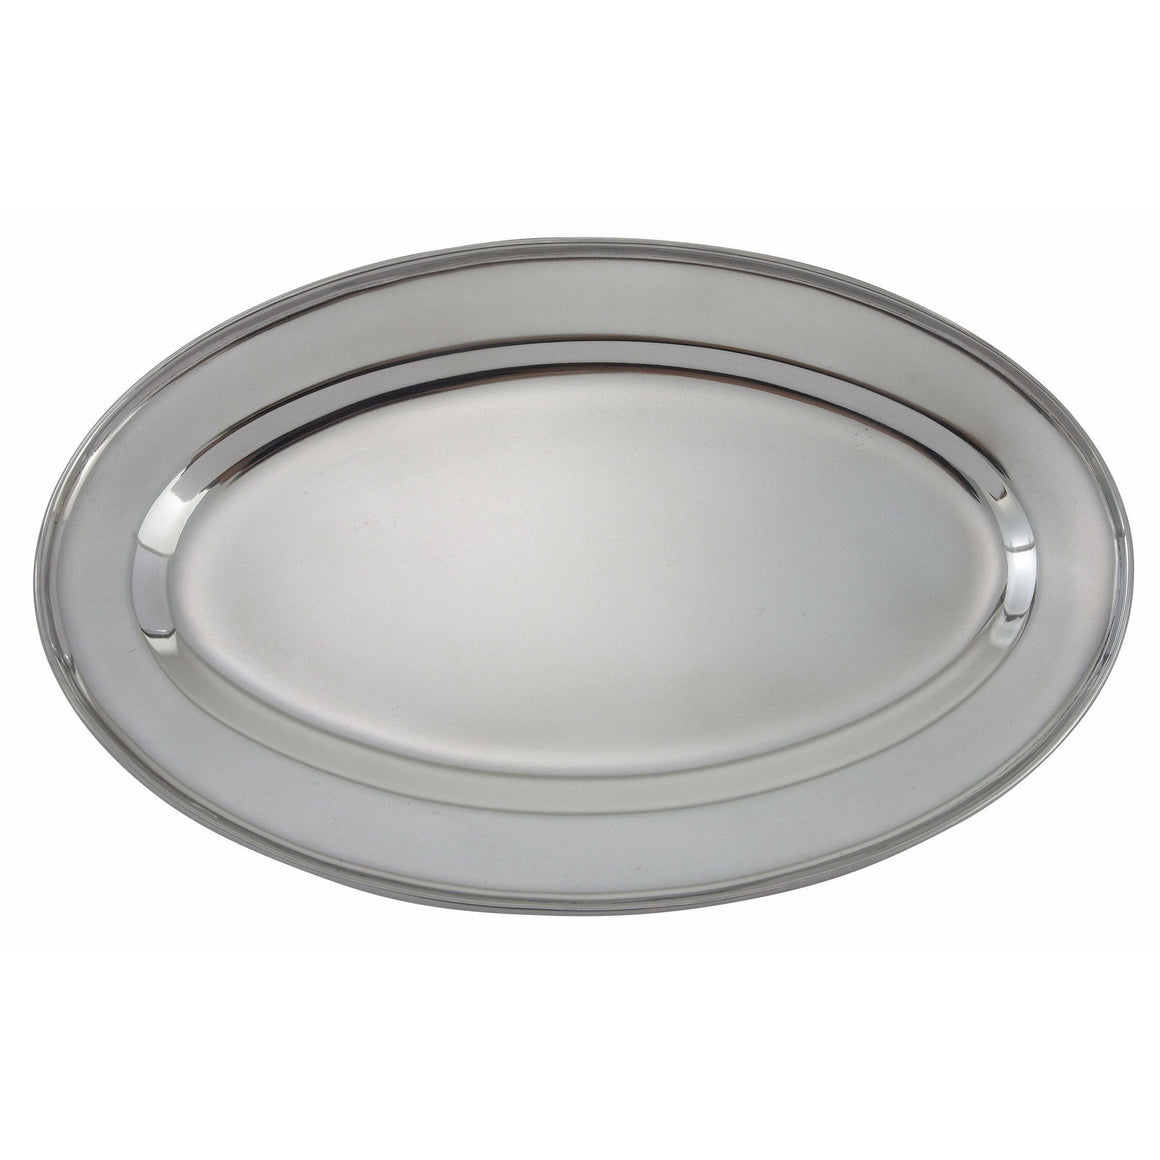 Winco - OPL-16 - Serving Platter, Oval, 16"x 10-1/4", Stainless Steel - Tabletop - Maltese & Co New and Used  restaurant Equipment 